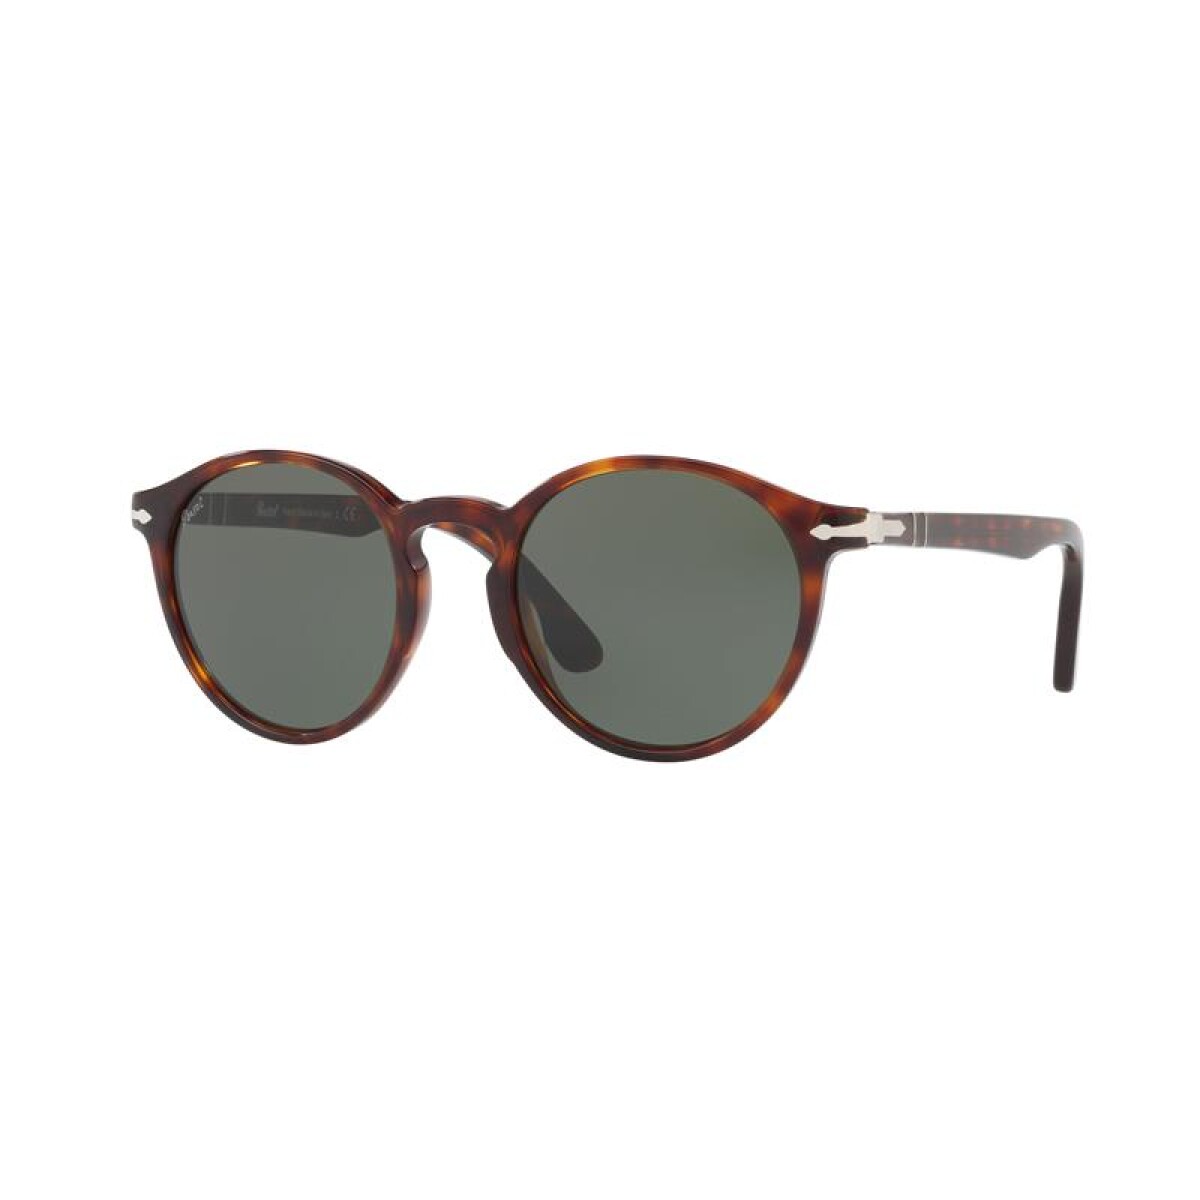 Persol 3171-s - 24/31 